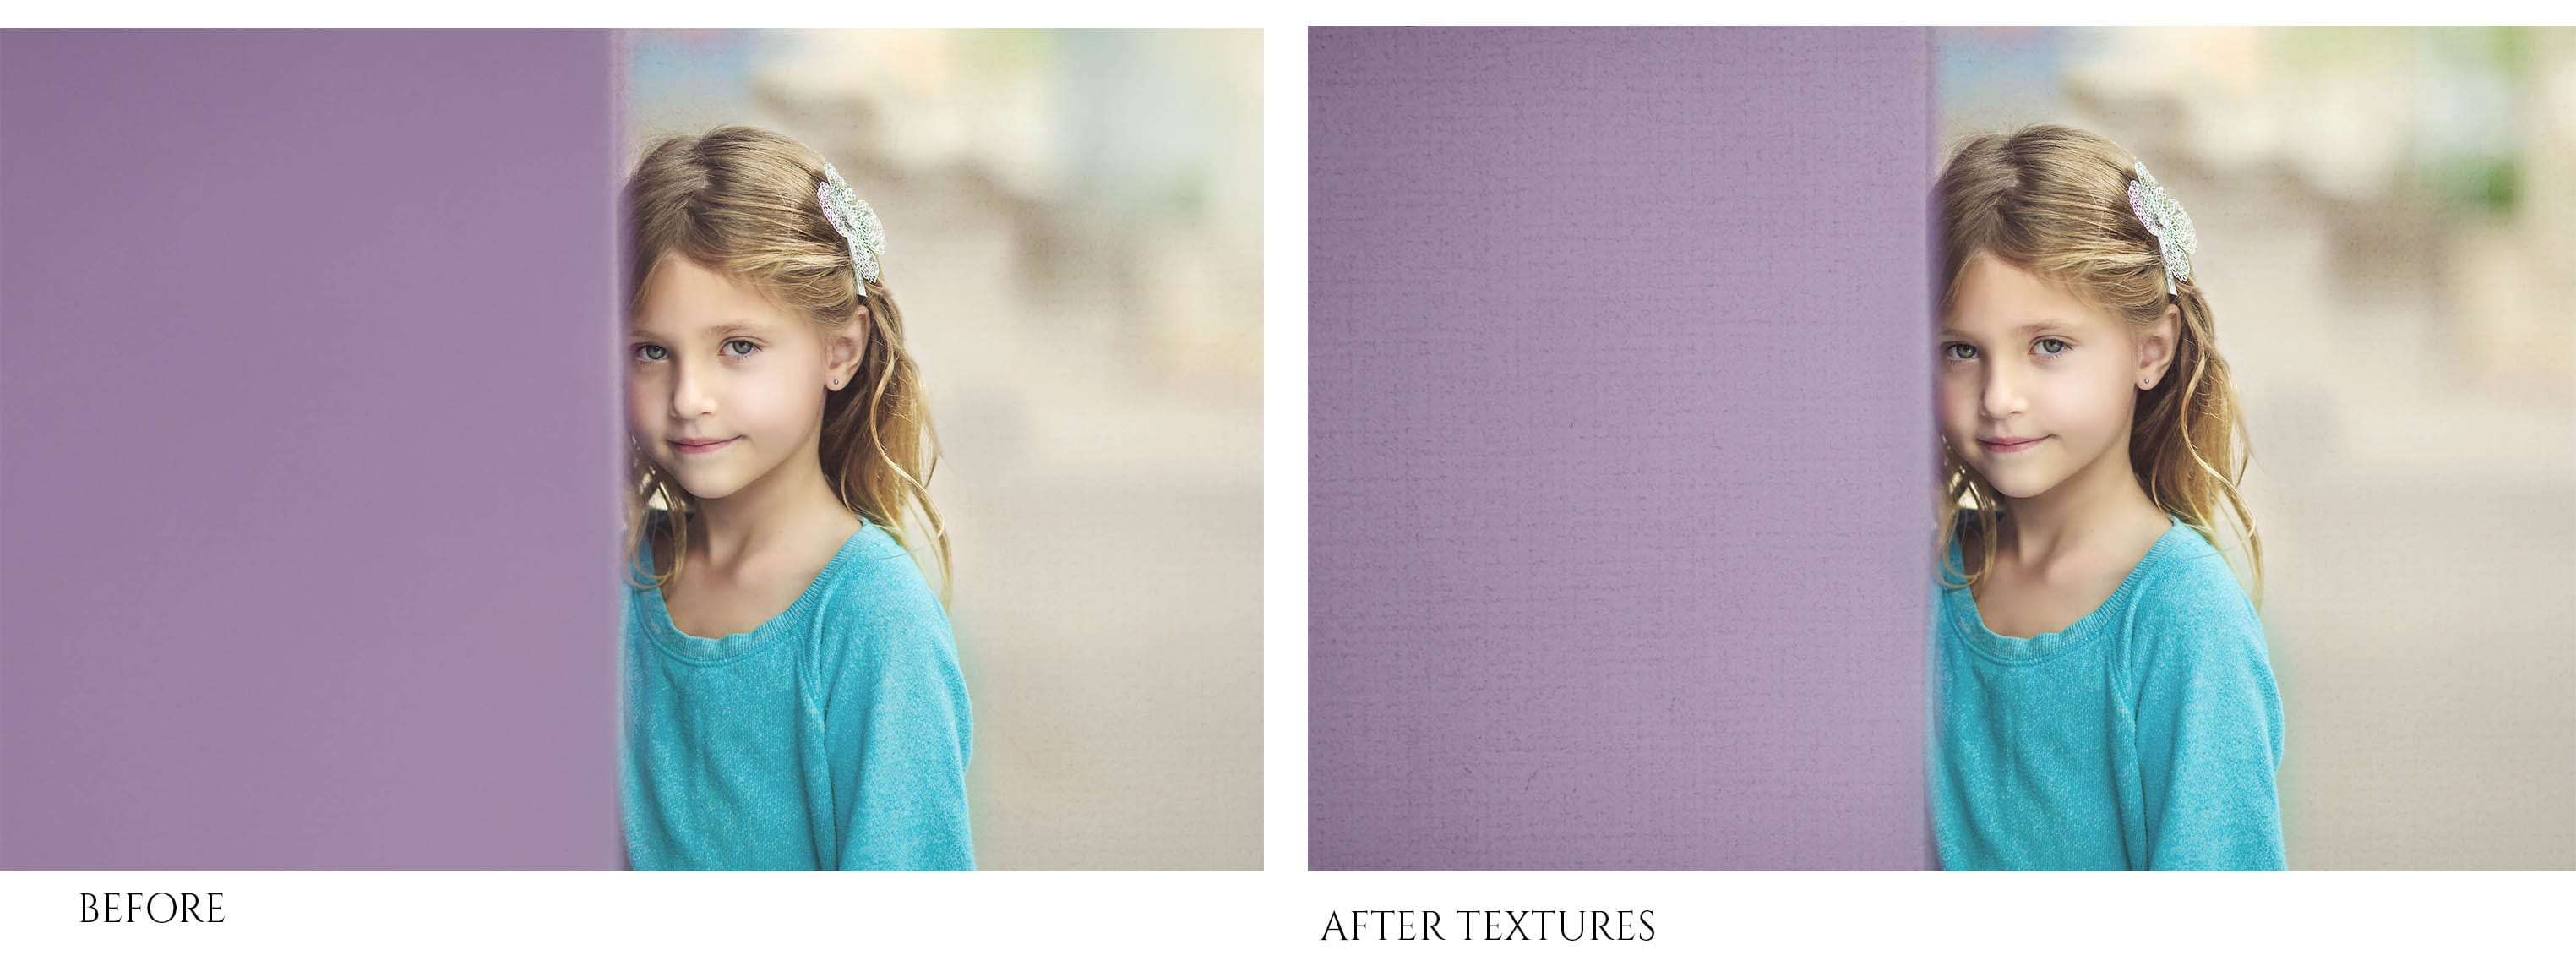 How To Create Texture In Your Photos